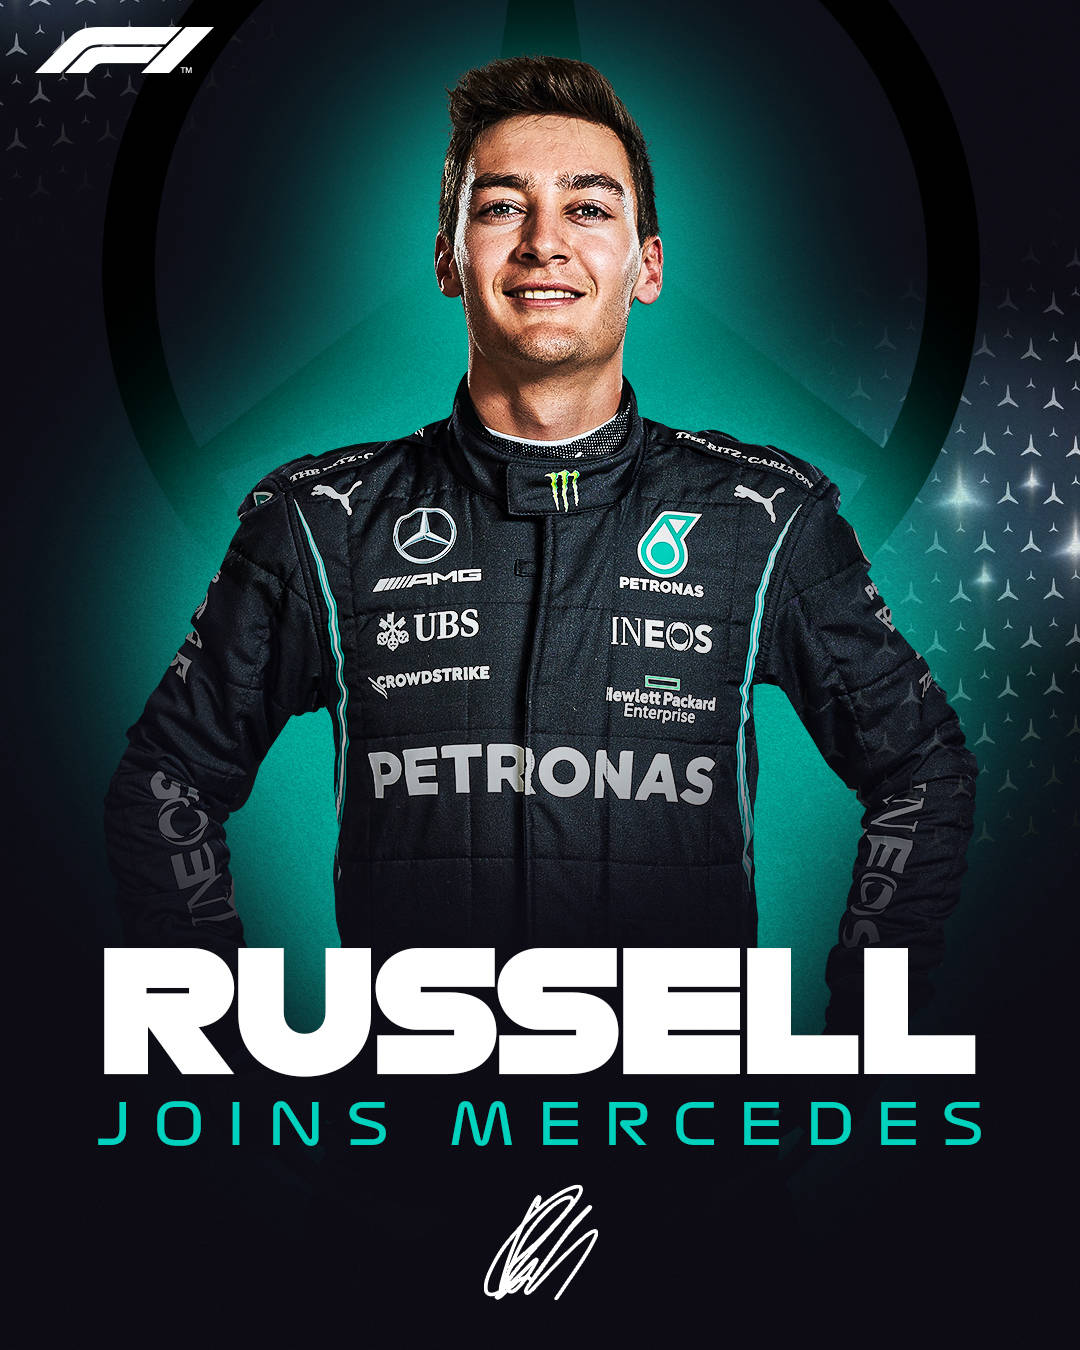 George Russel Joins Mercedes Poster Wallpaper